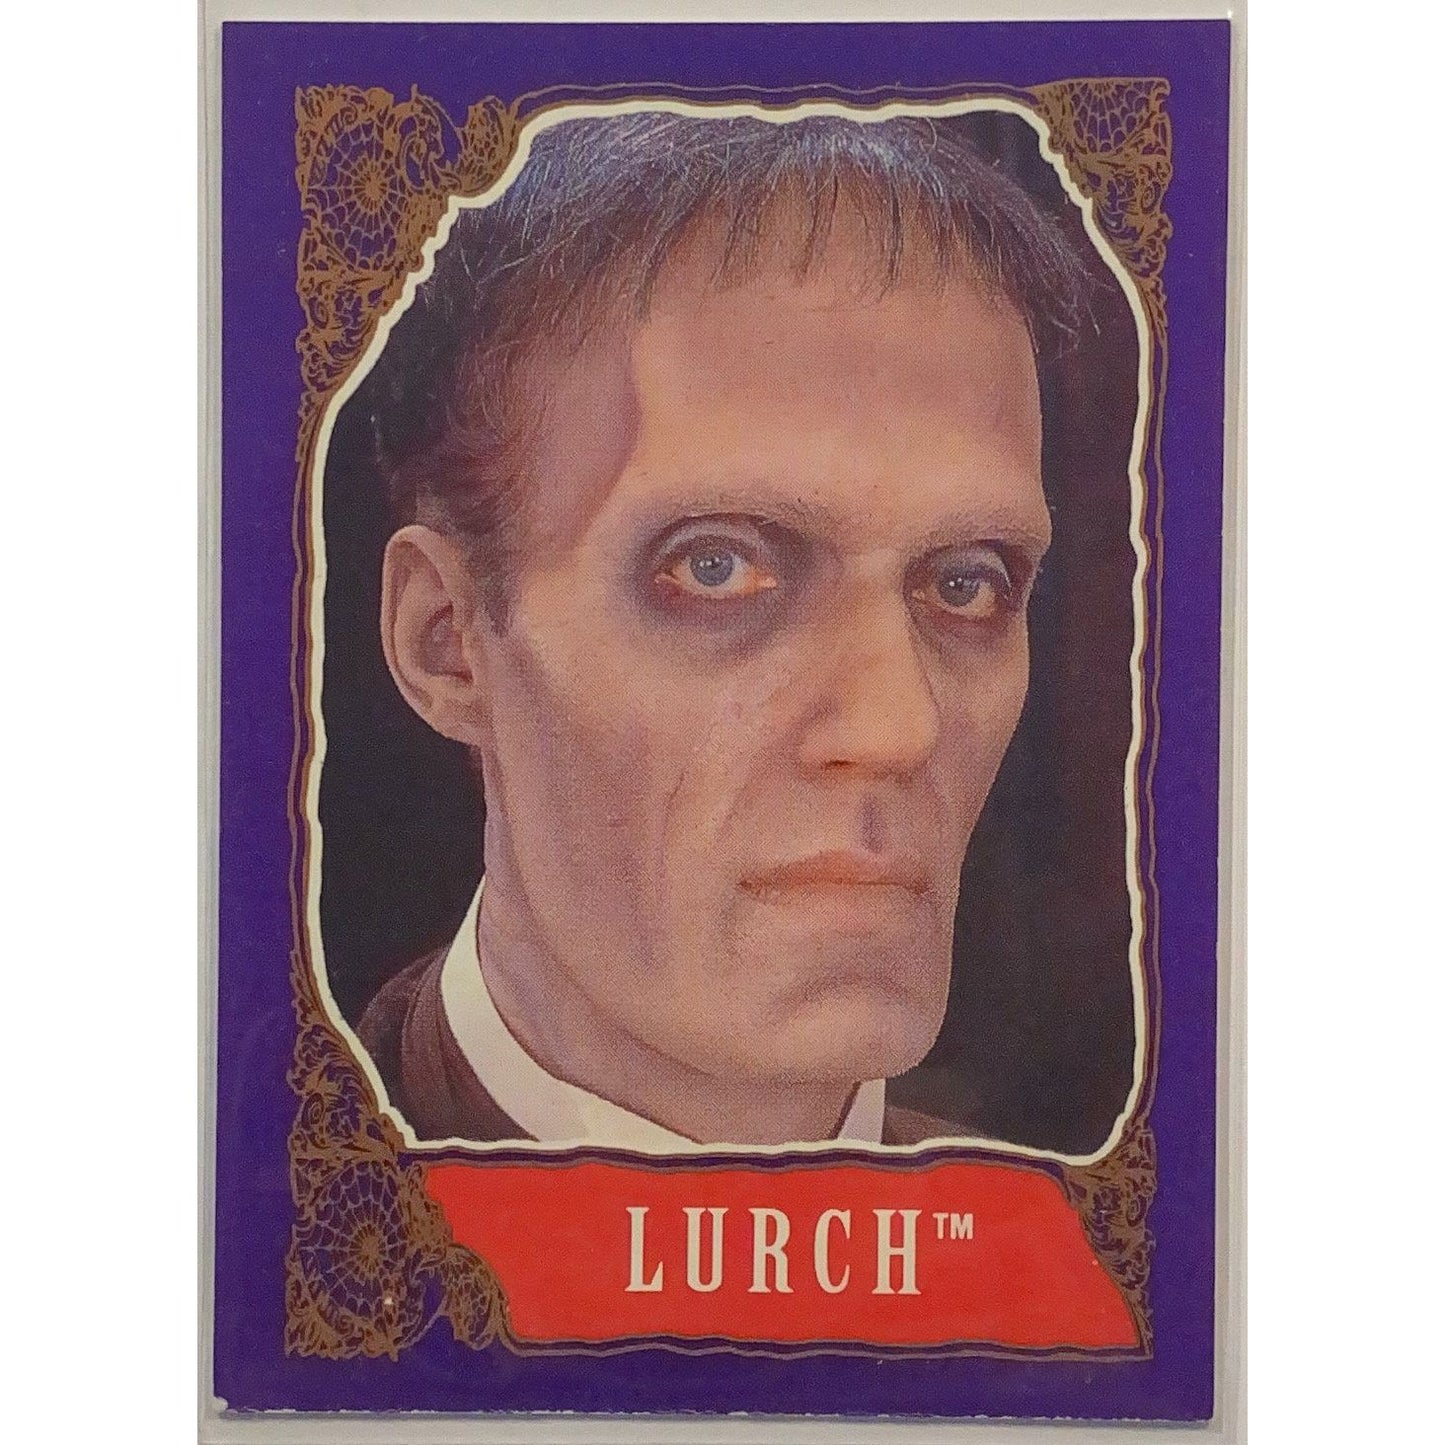  1991 Paramount Pictures The Adams Family Lurch #5  Local Legends Cards & Collectibles